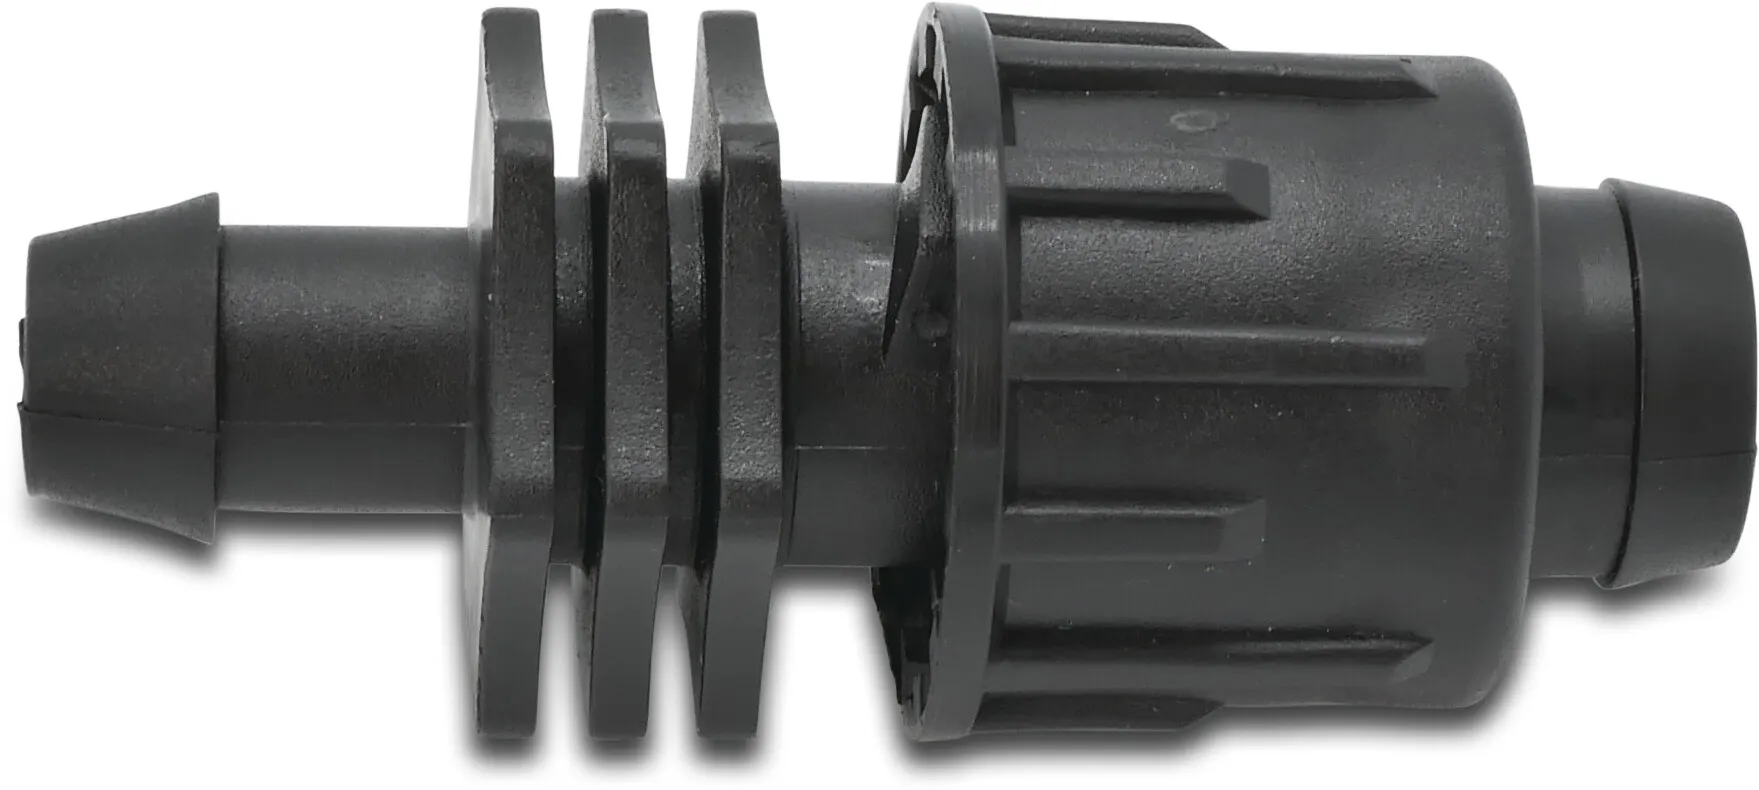 Branch connector PP 8 mm x 17 mm push-in x tape black